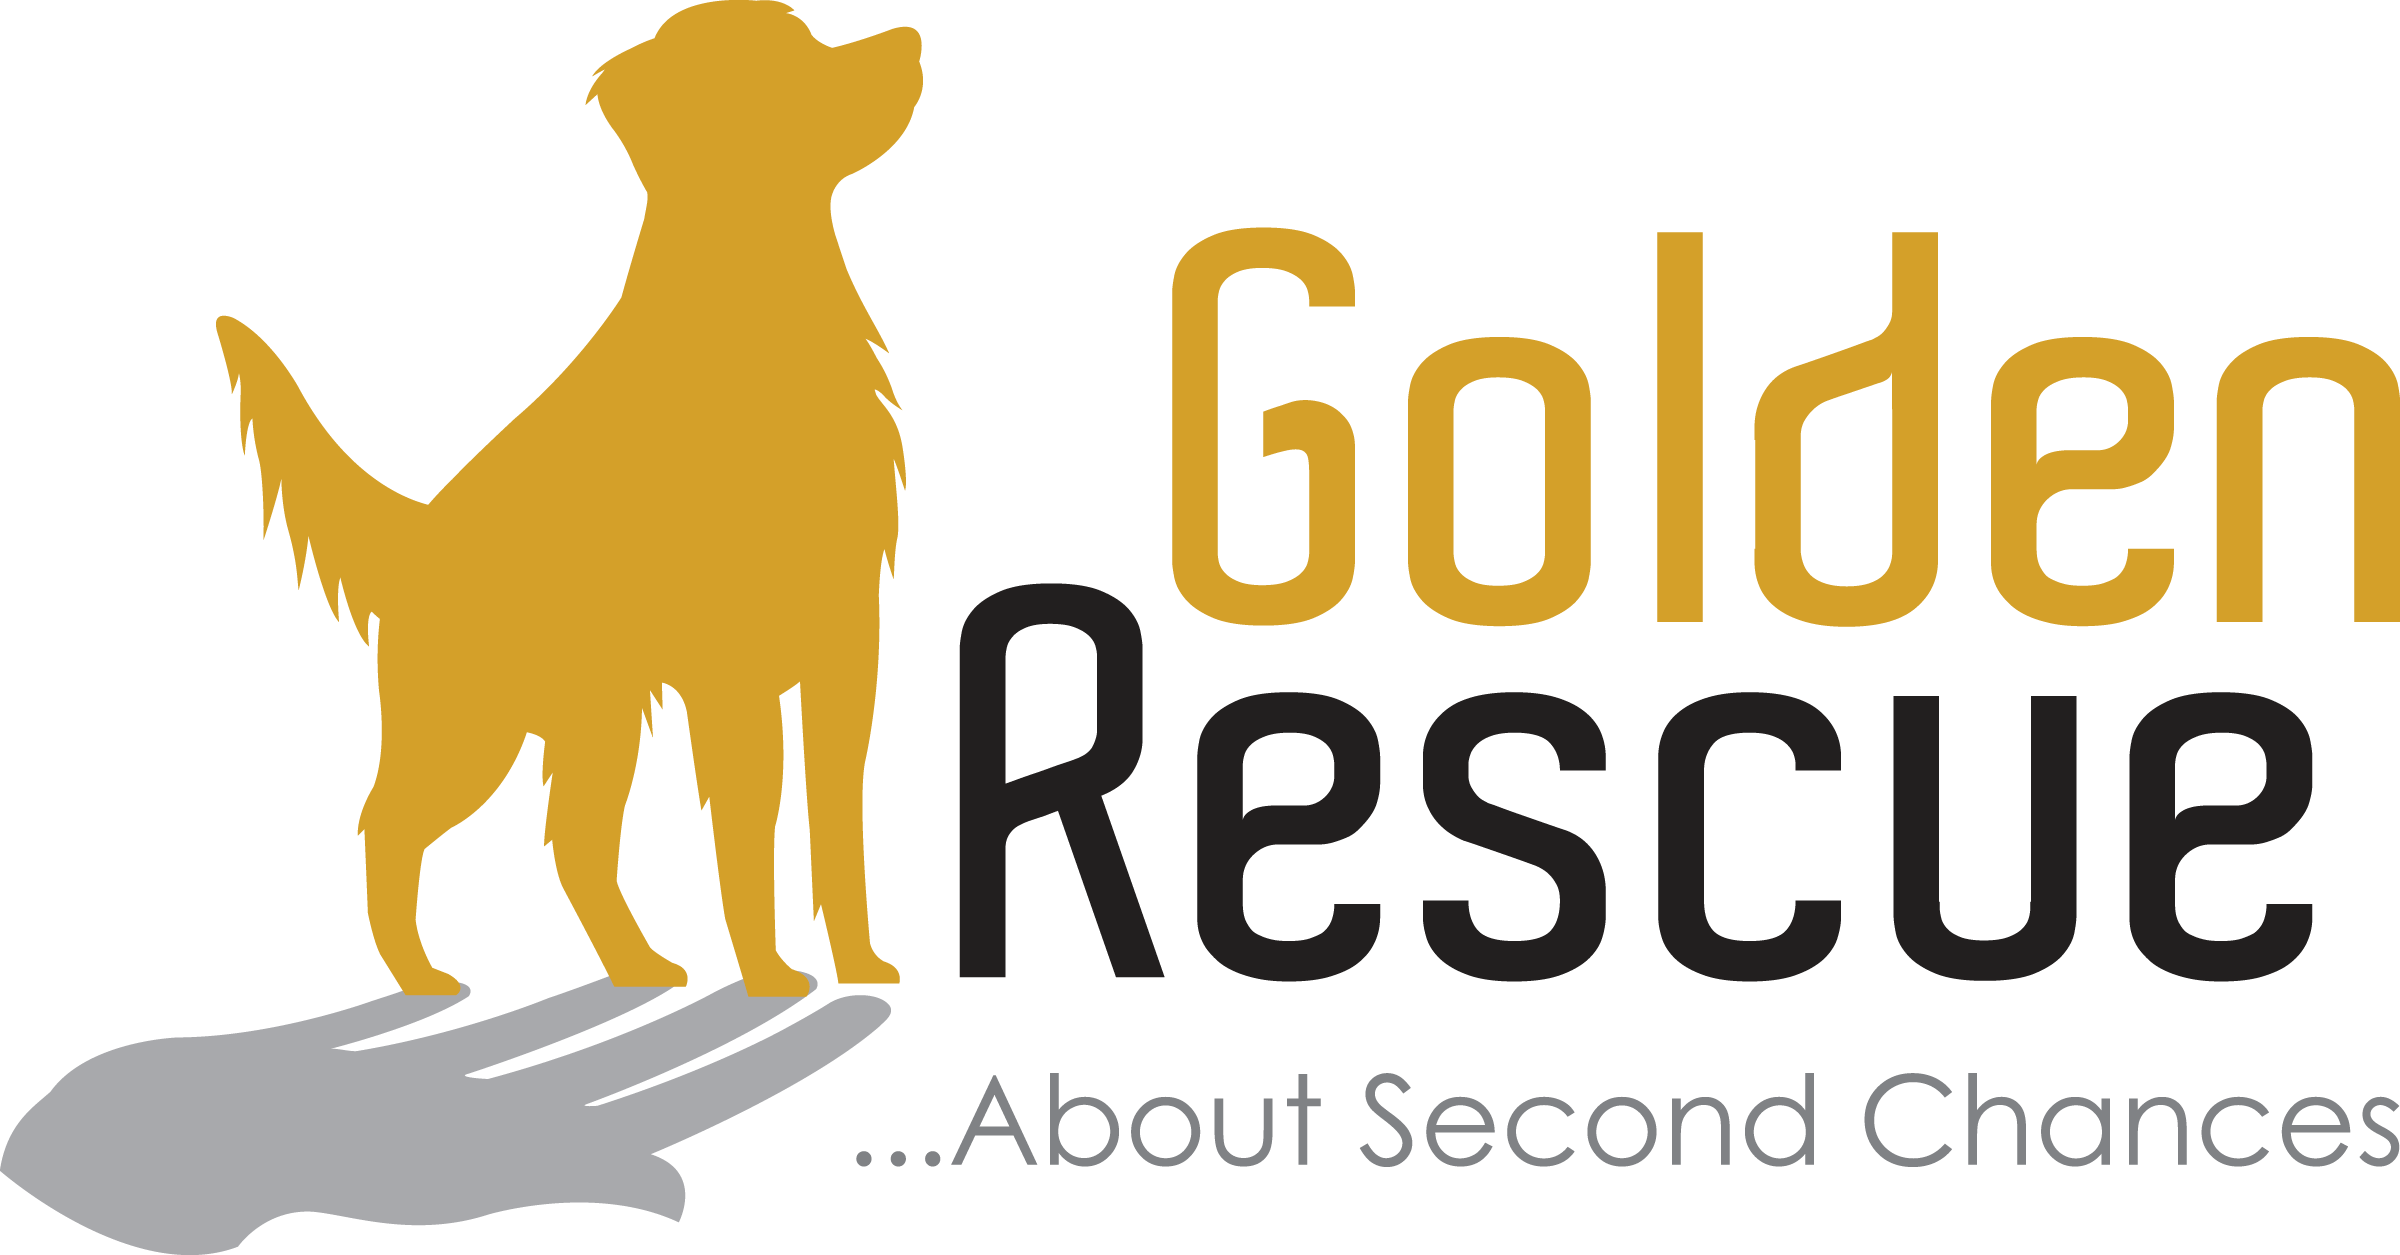 Stephan Lafreniere is a proud sponsor and volunteer of Golden Rescue ™